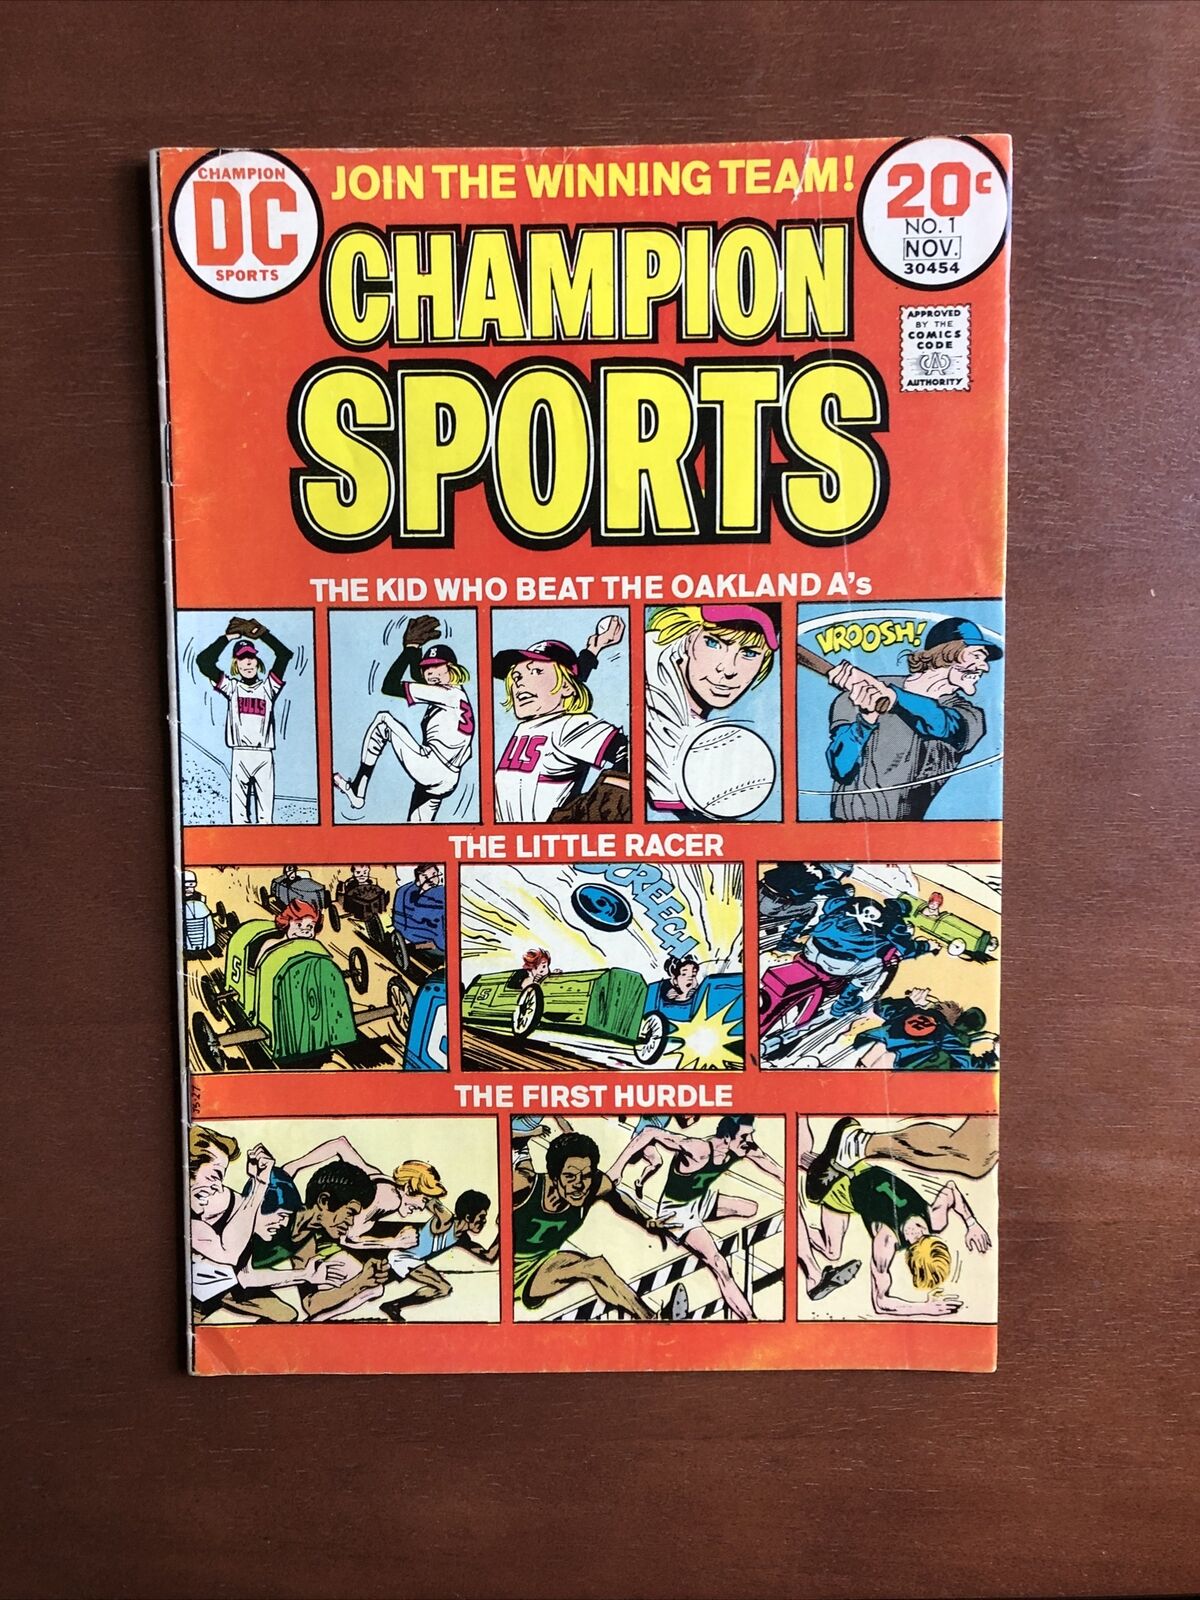 Champion Sports #1 (1973) 7.0 FN DC Key Issue Bronze Age Comic Book